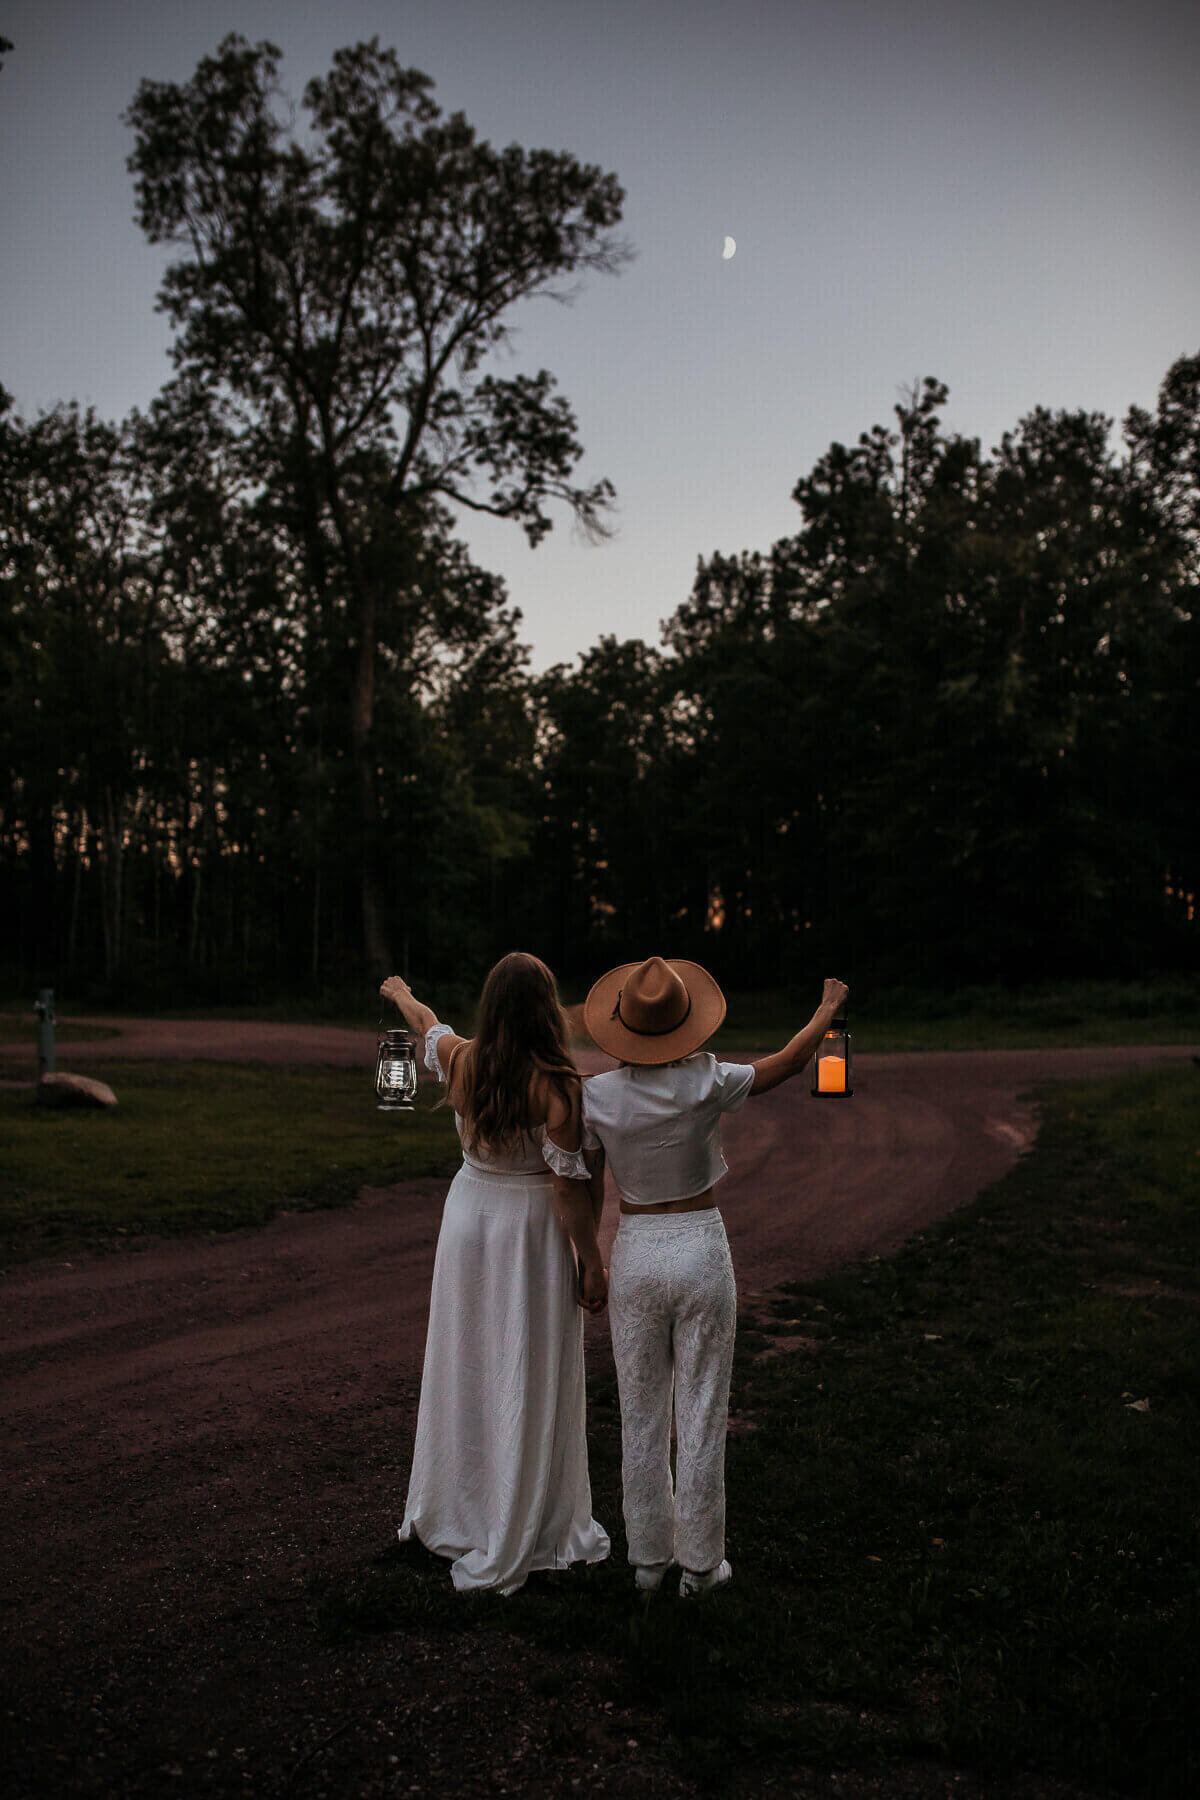 A couple holding hands and holding up lanterns at dusk